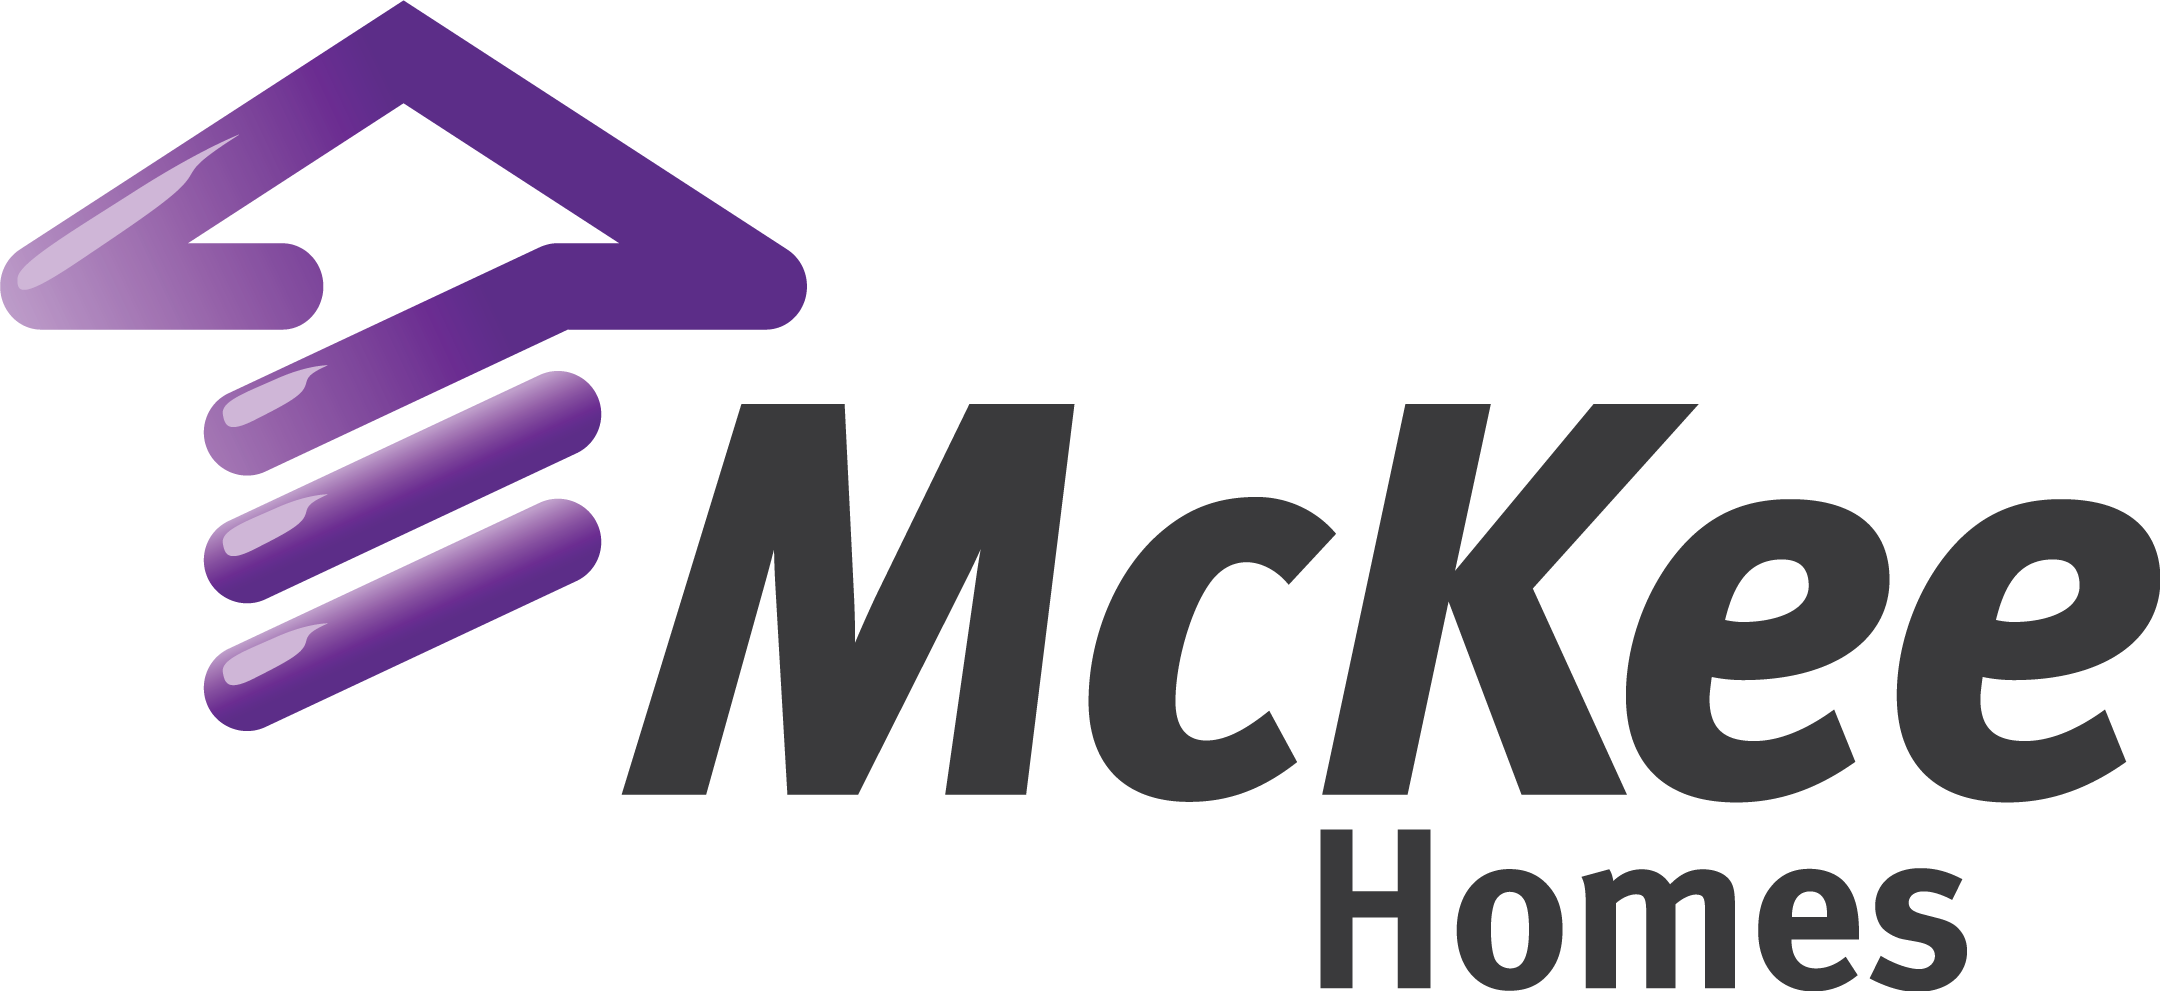 1A. McKee Homes (Presenting)